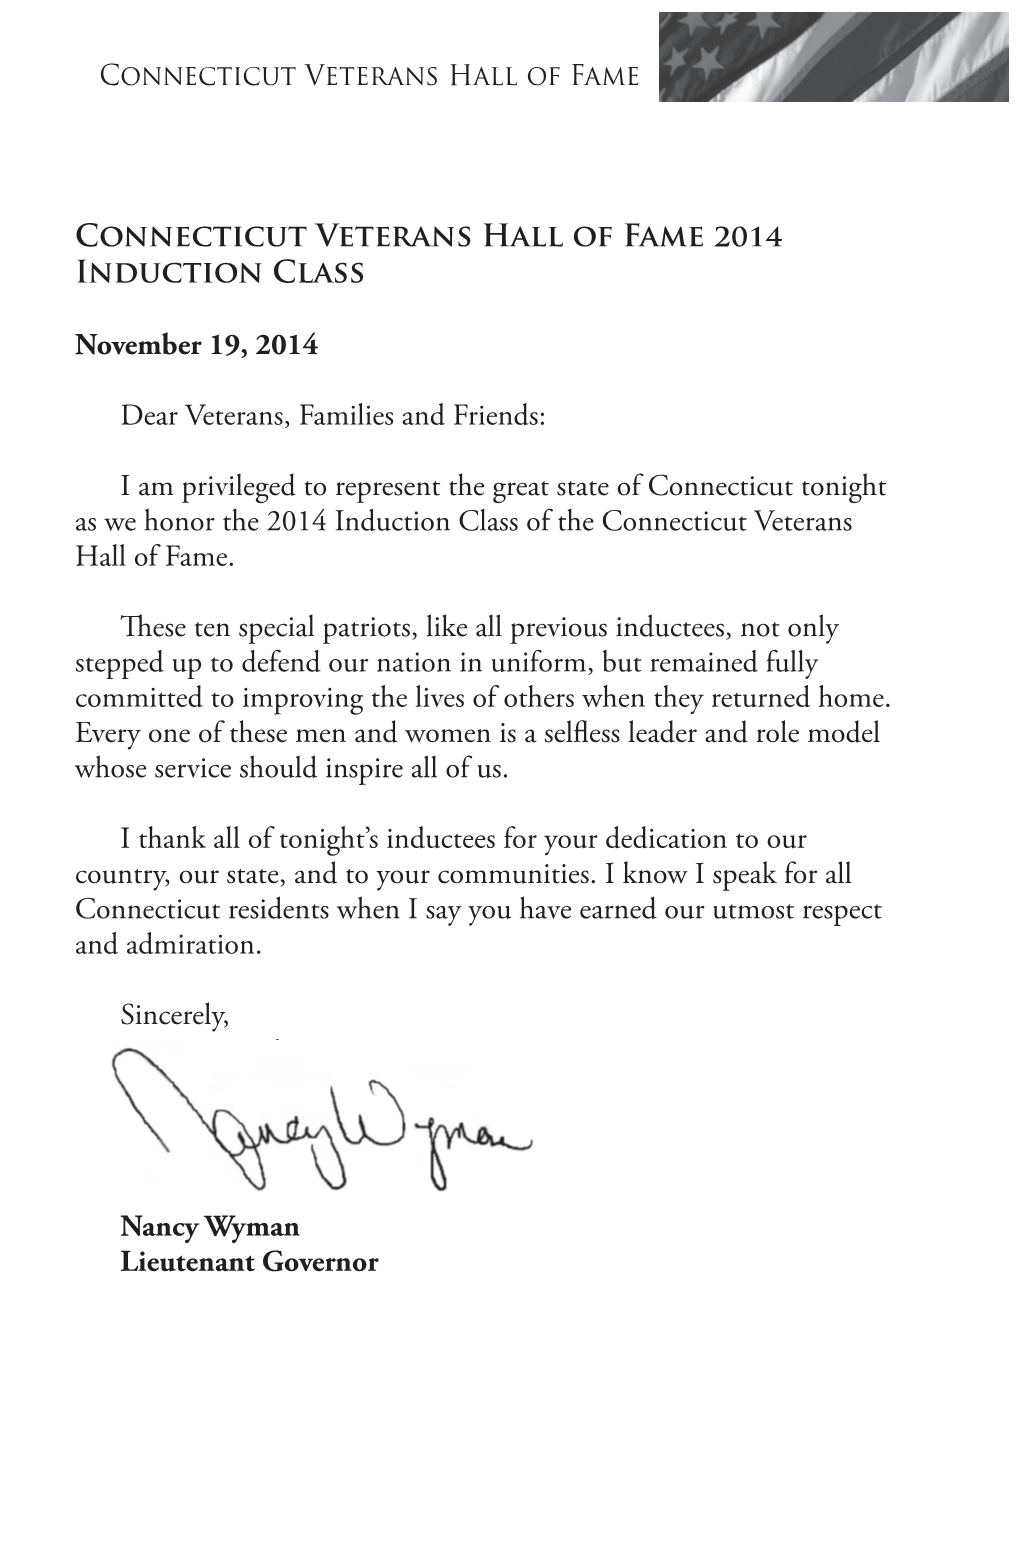 Sincerely, Nancy Wyman Connecticut Veterans Hall of Fame 2014